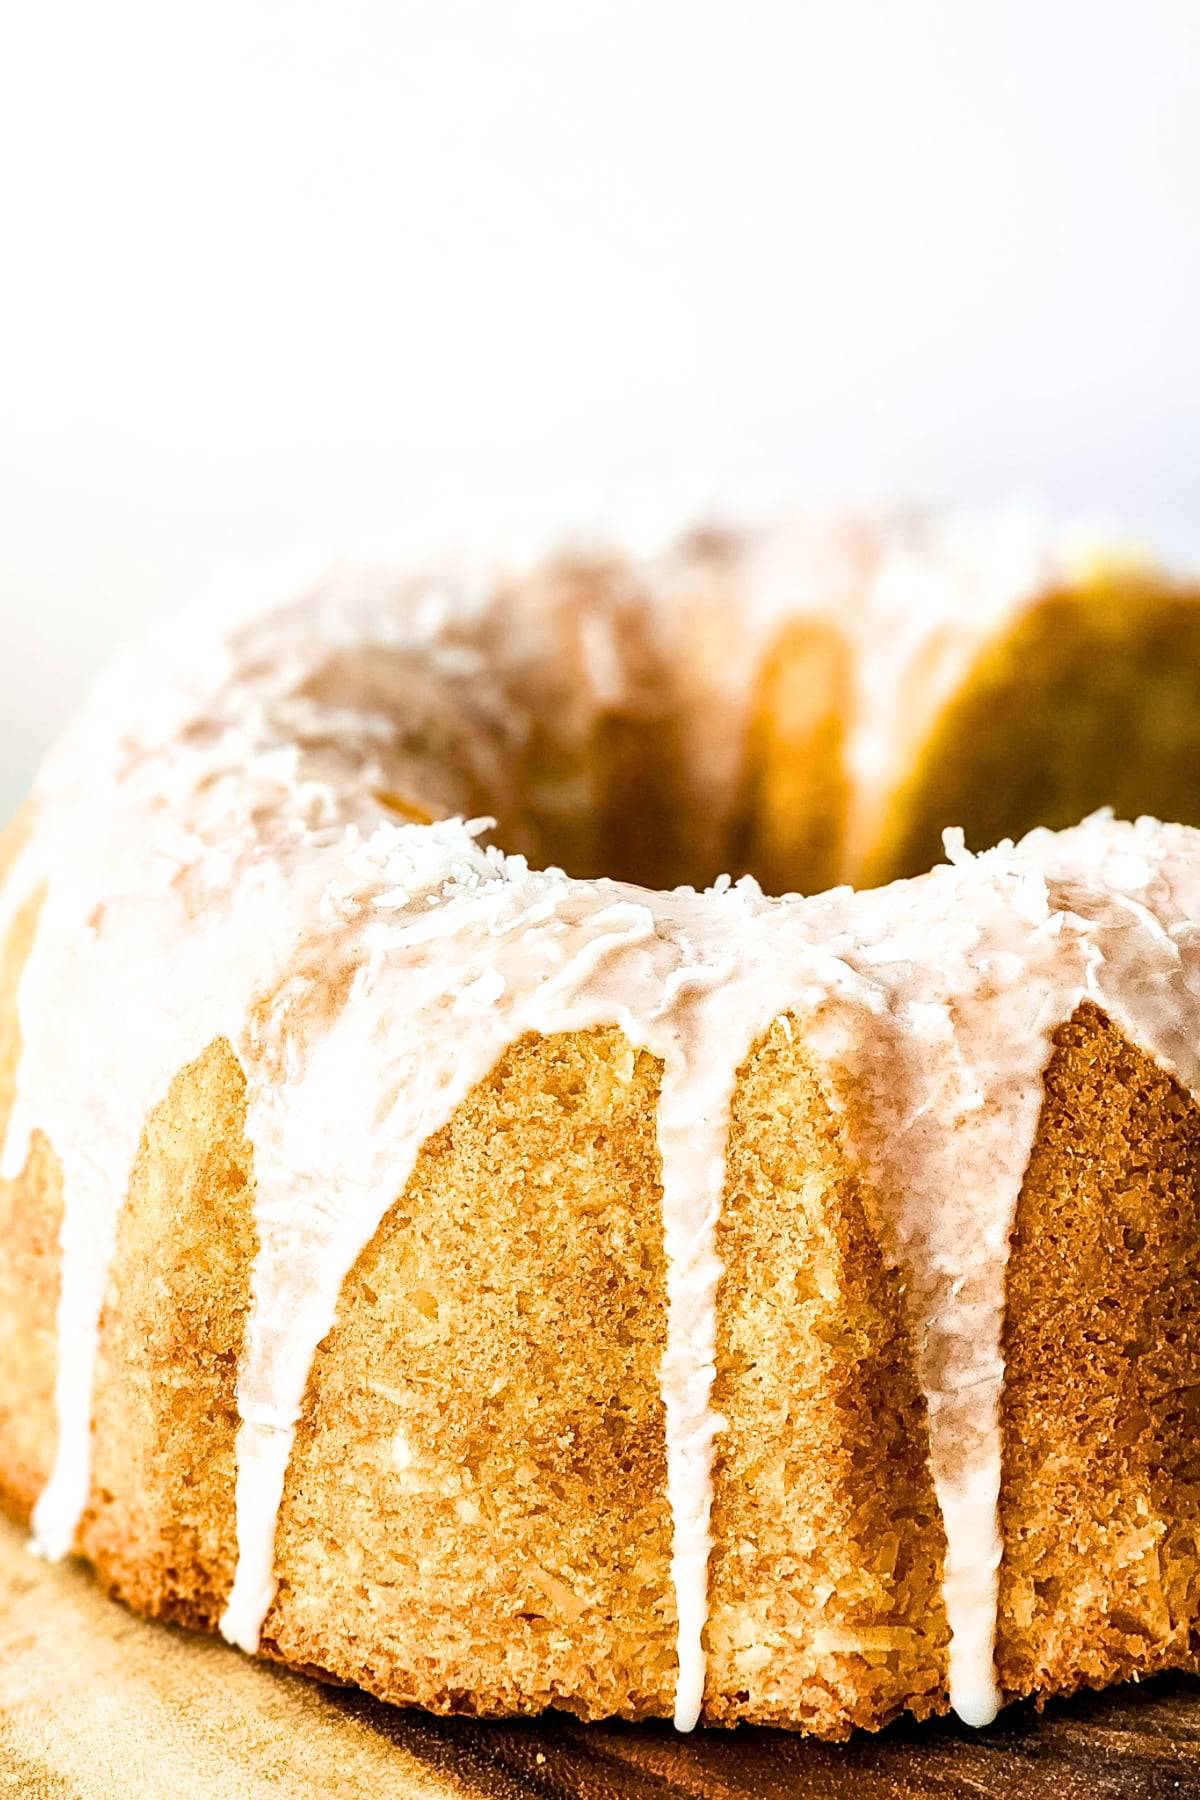 Up close view of glazed coconut cake. / Easy Gluten-Free Coconut Cake (Dairy-Free)
